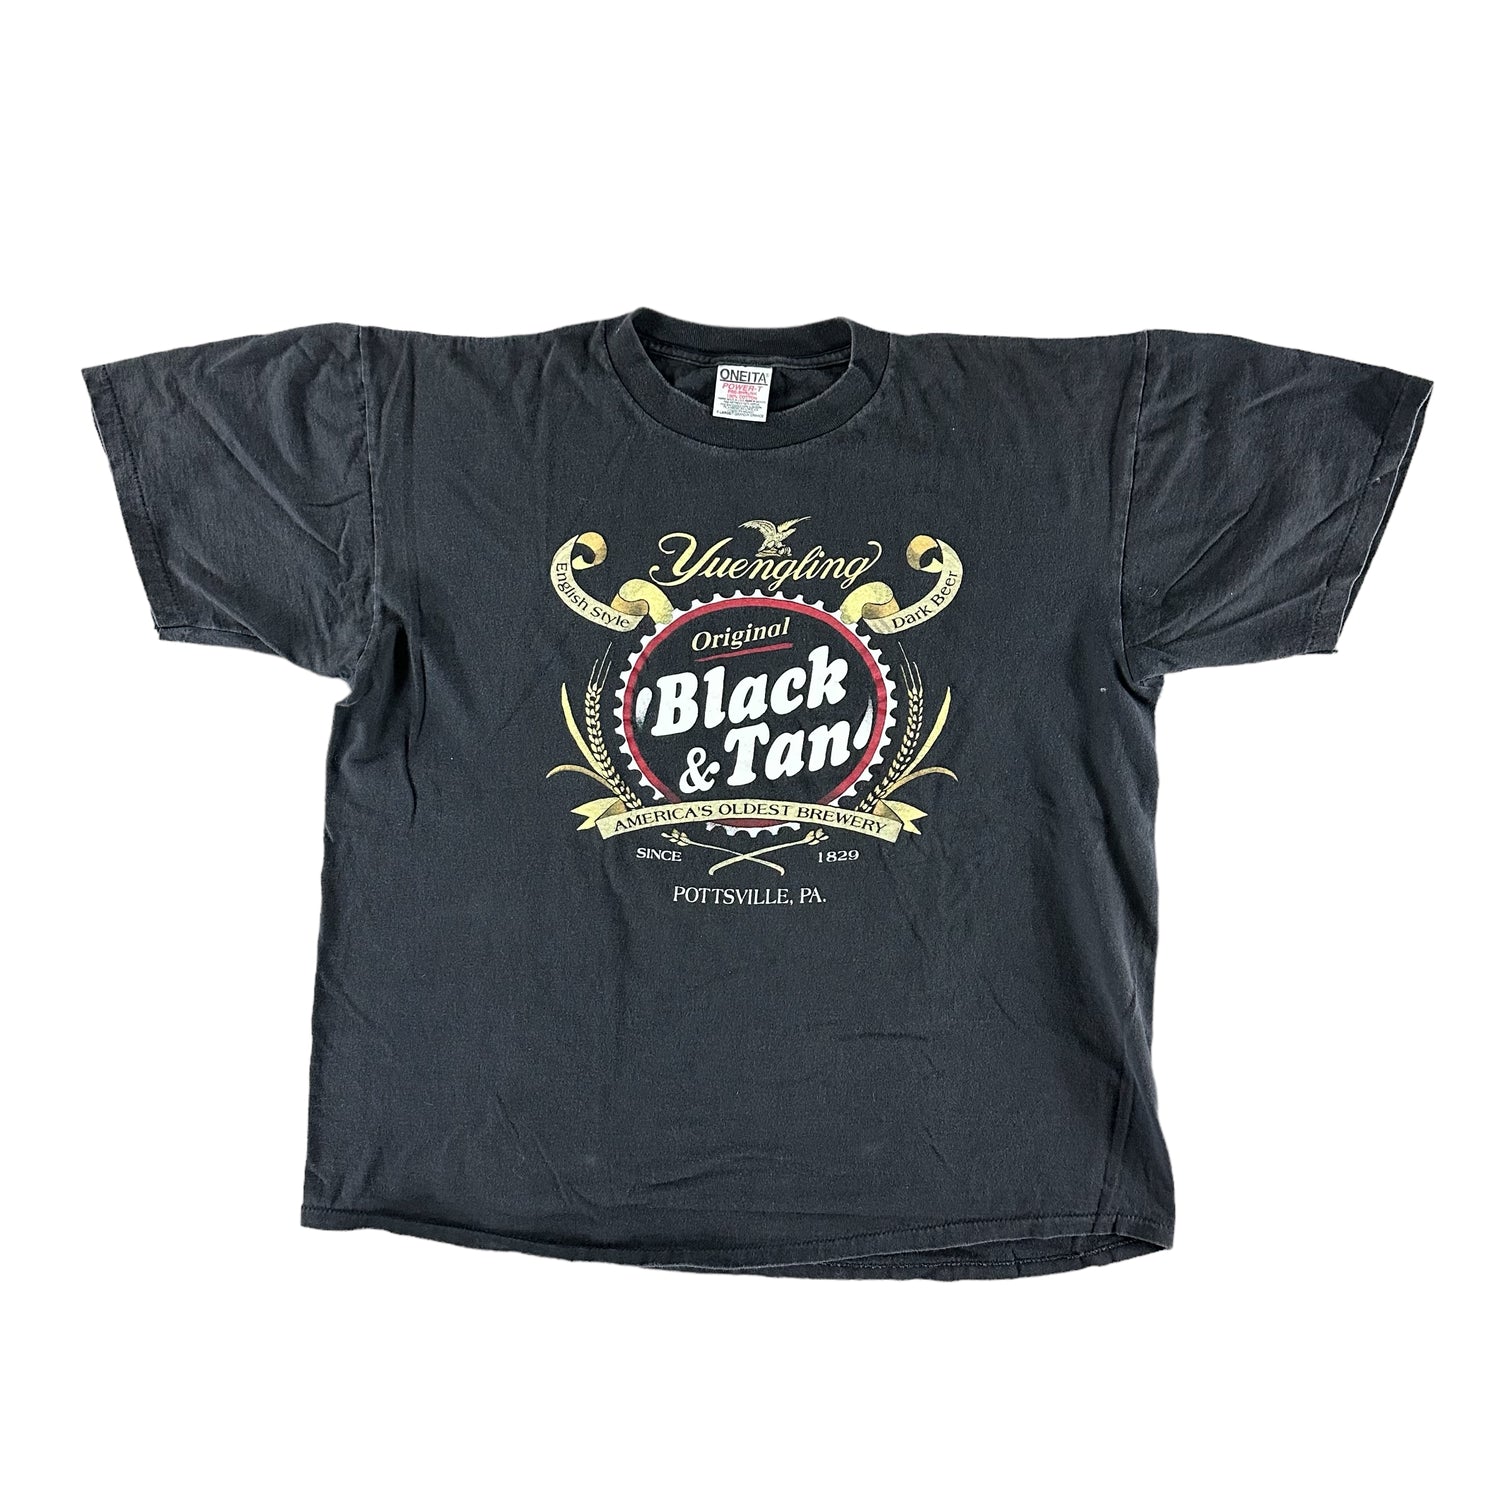 Vintage 1990s Black and Tan Beer T-shirt size XL